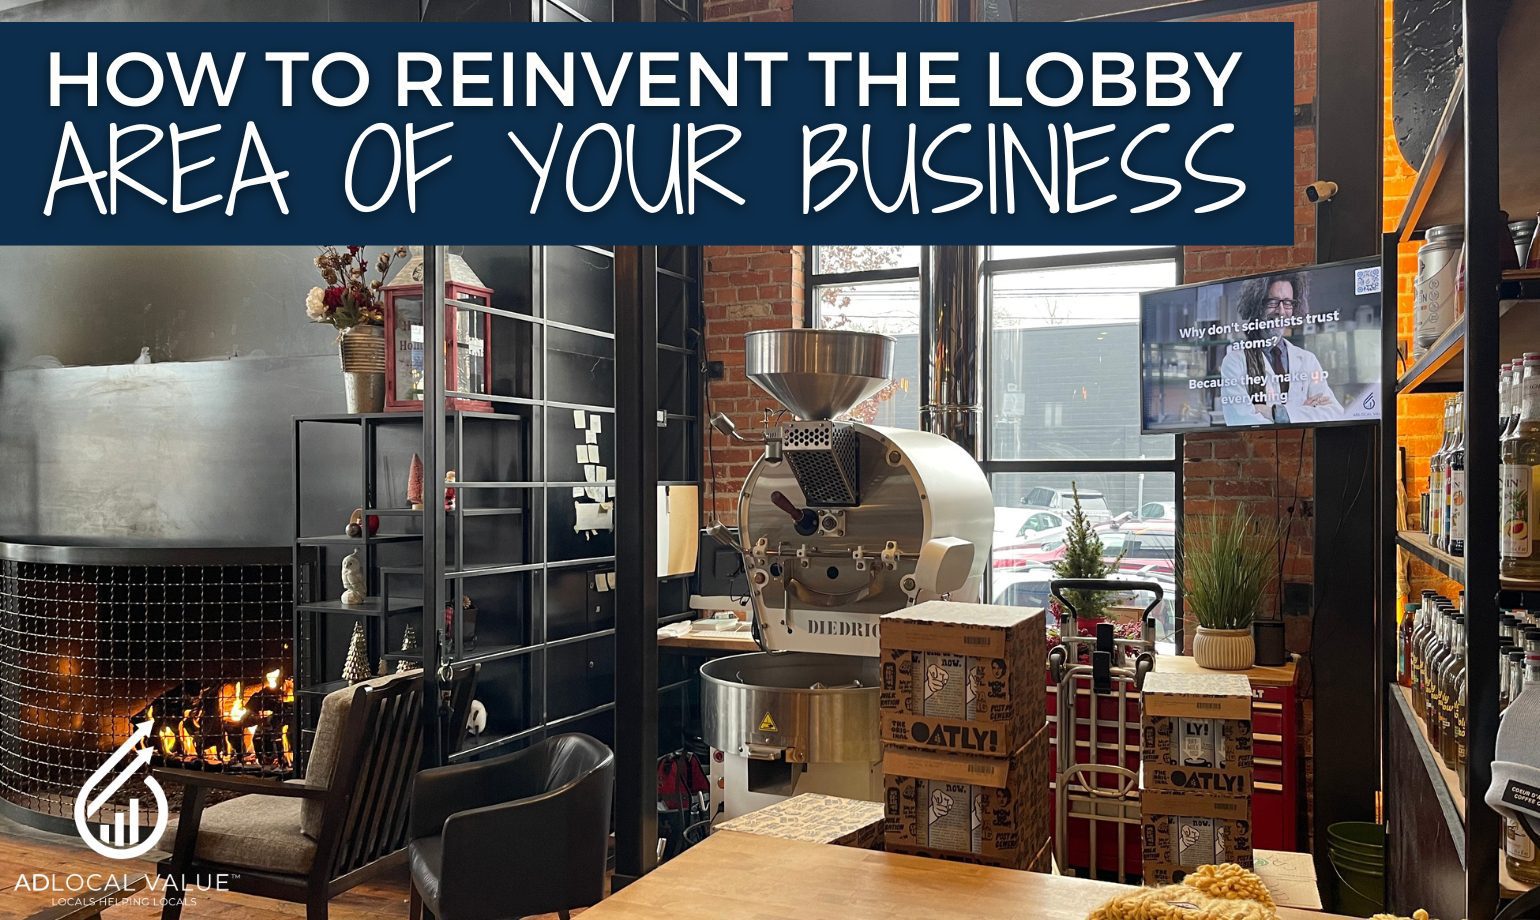 How to Reinvent the Lobby Area of Your Business